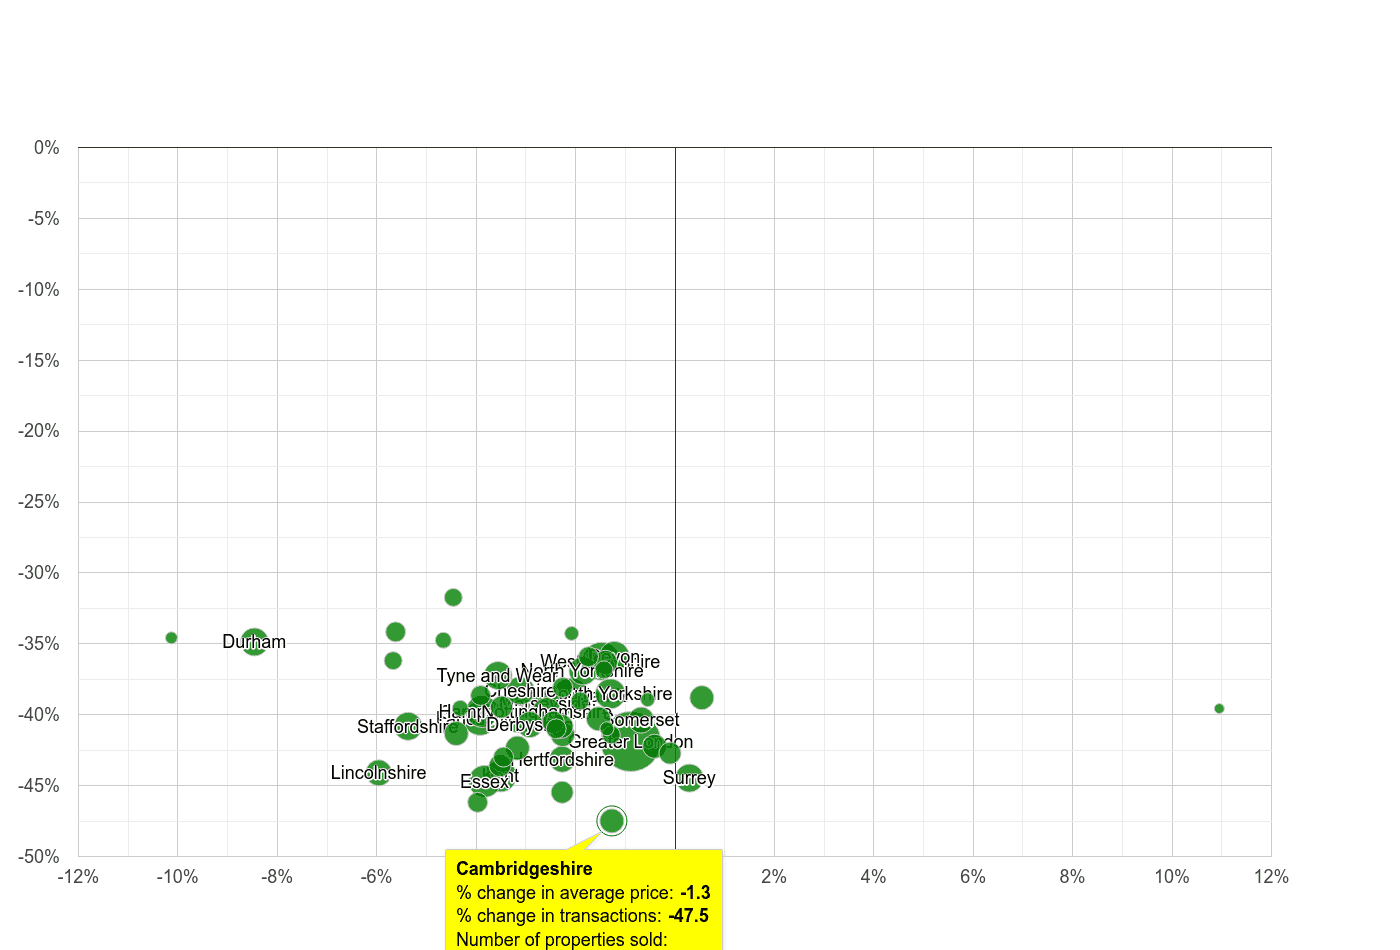 Cambridgeshire property price and sales volume change relative to other counties